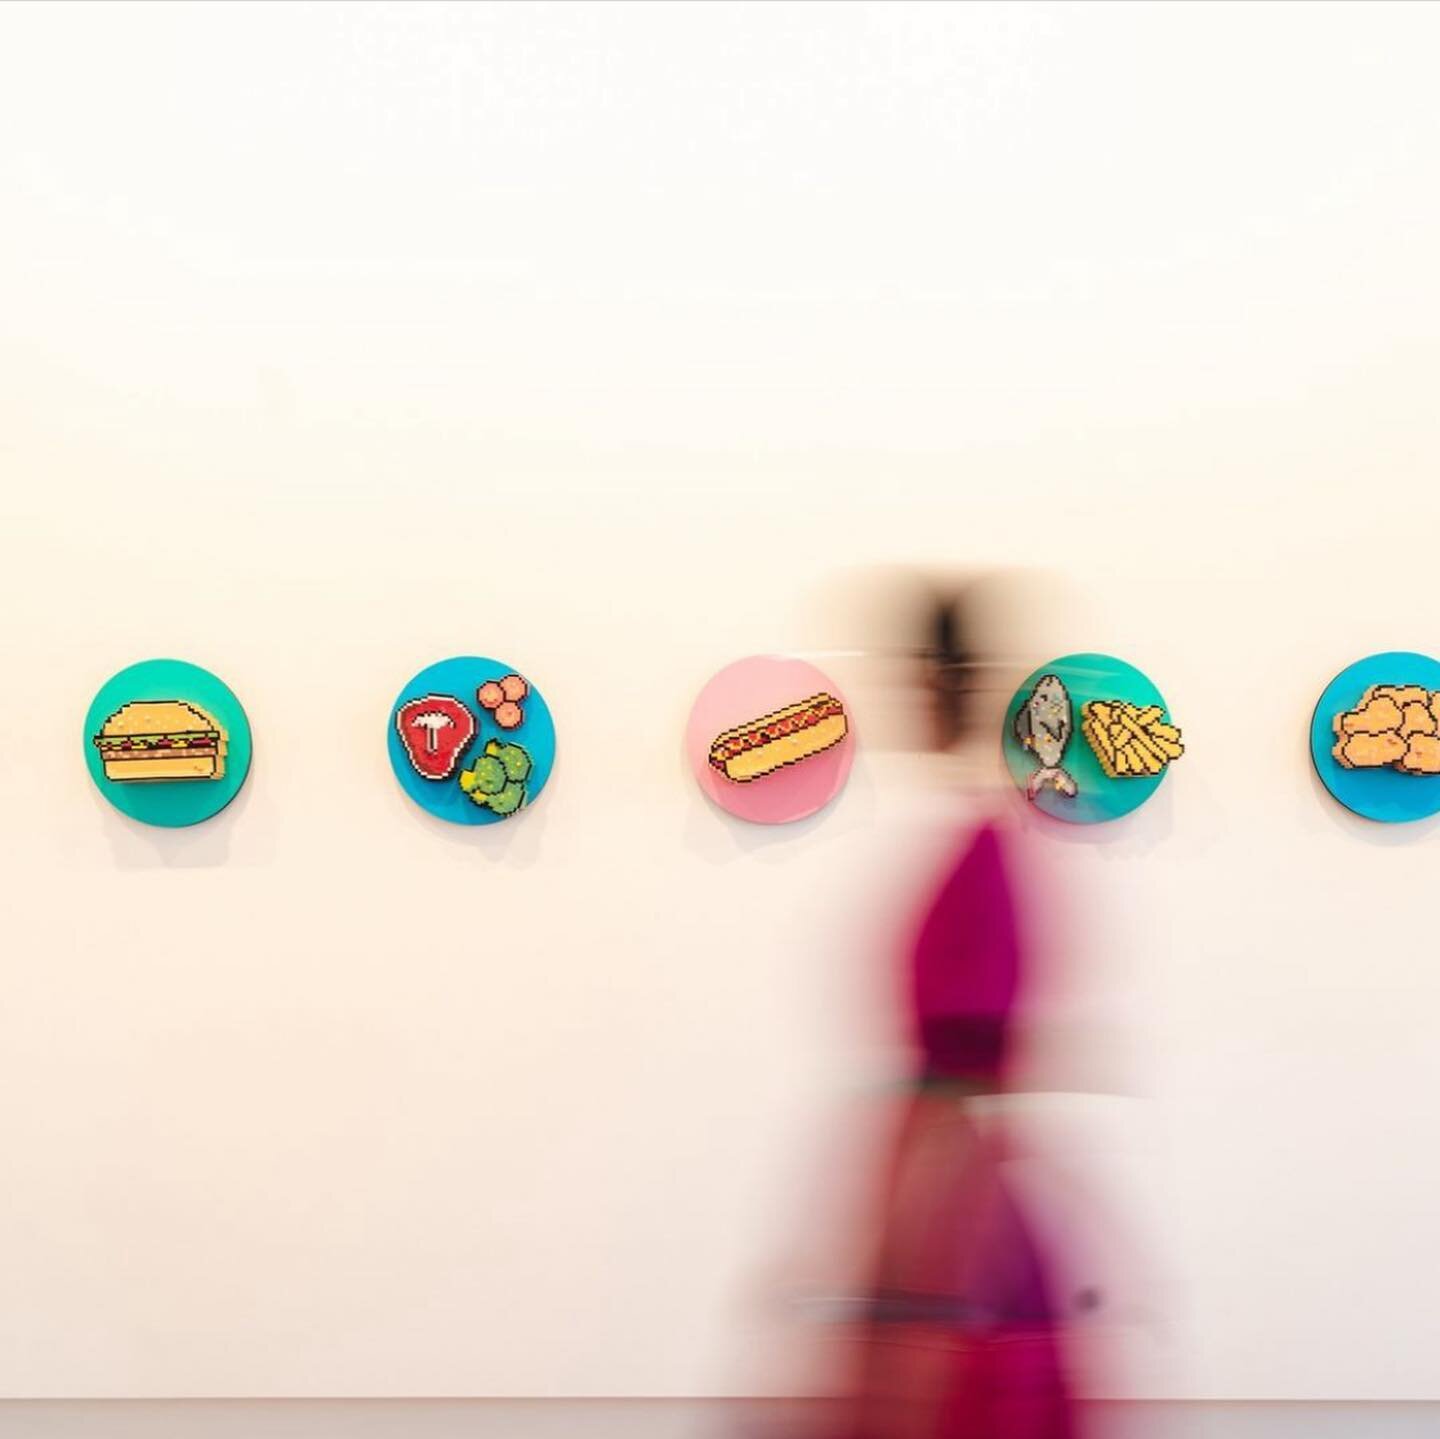 Very grateful to be part of @flyingartsalliance touring exhibition Perspective - Queensland Regional Art Awards. Very grateful to have received the Environmental Art Award for my work Food-O-Matic and Pixel Printed Food. 

This work in now on display